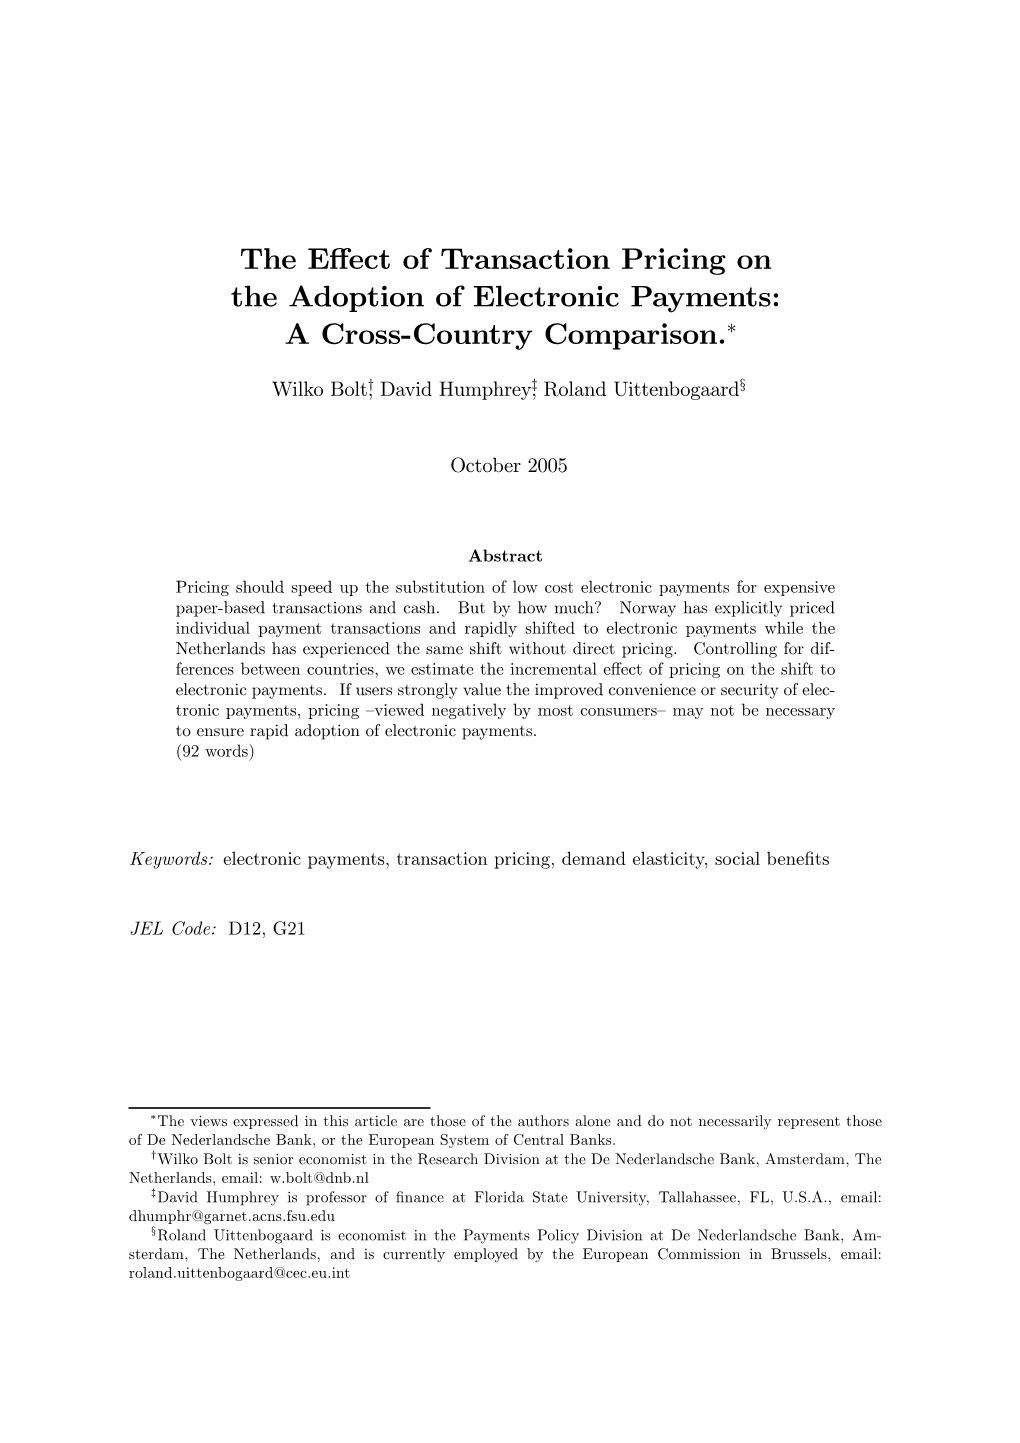 The Effect of Transaction Pricing on the Adoption of Electronic Payments